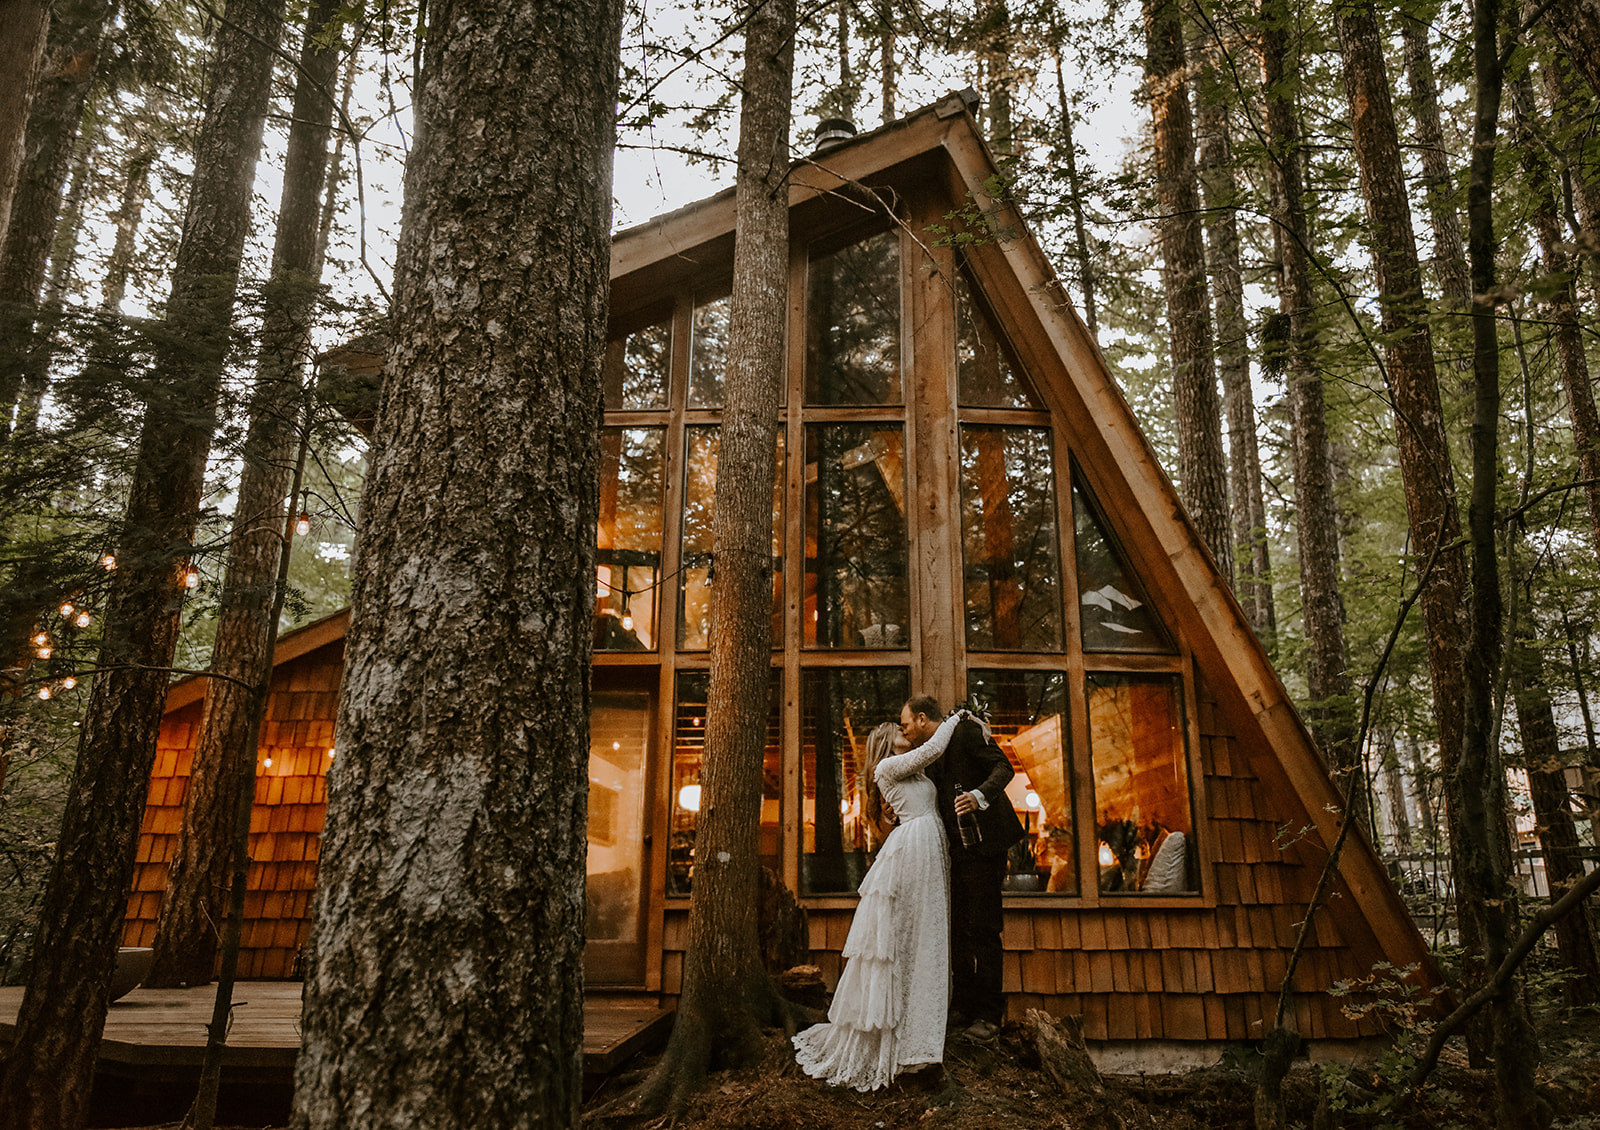 A couple who eloped kissing in front of an A-Frame Cabin in Oregon